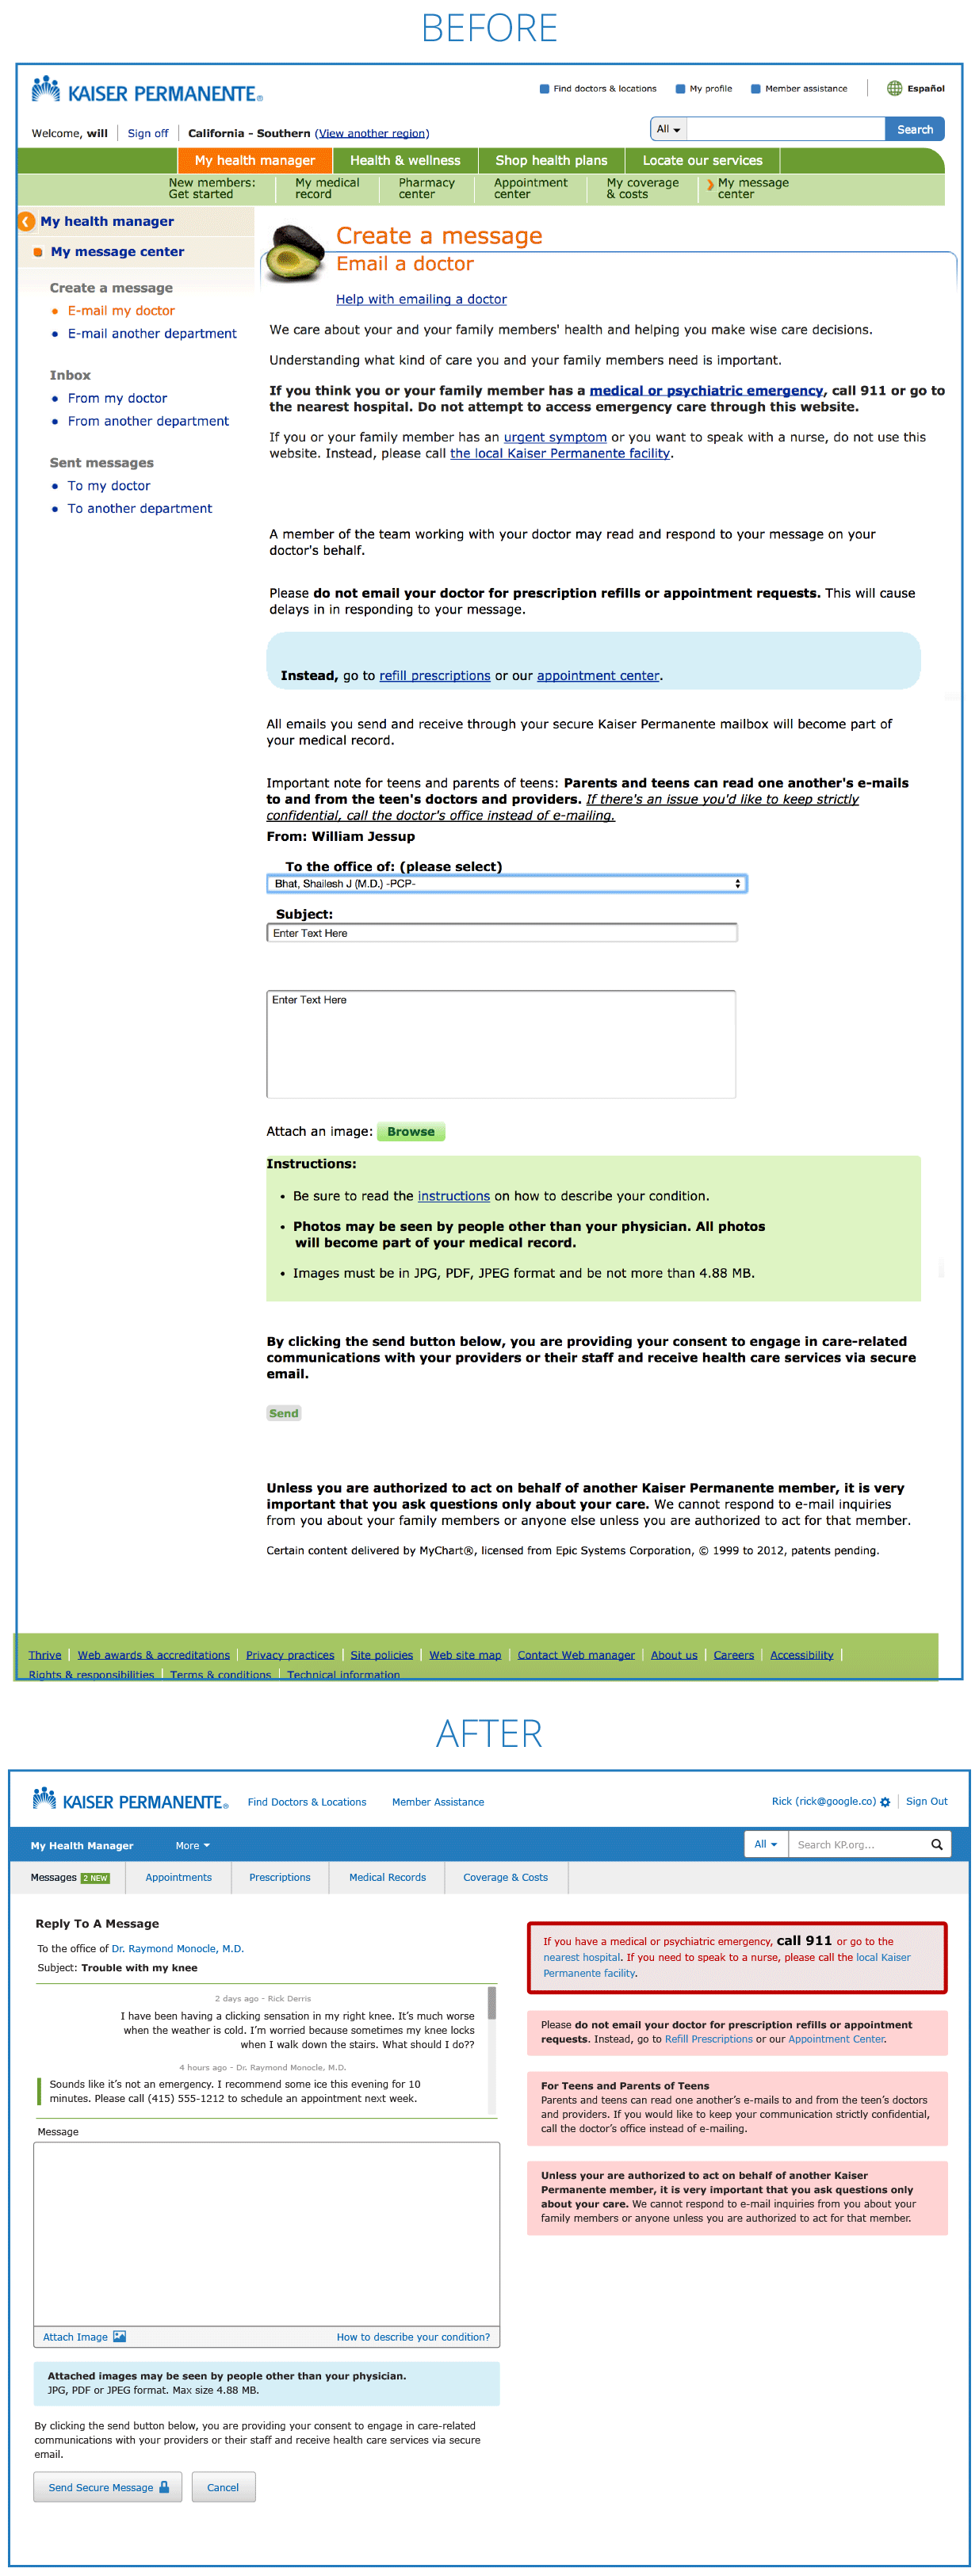 KP.org Send and Reply to Message before and after design